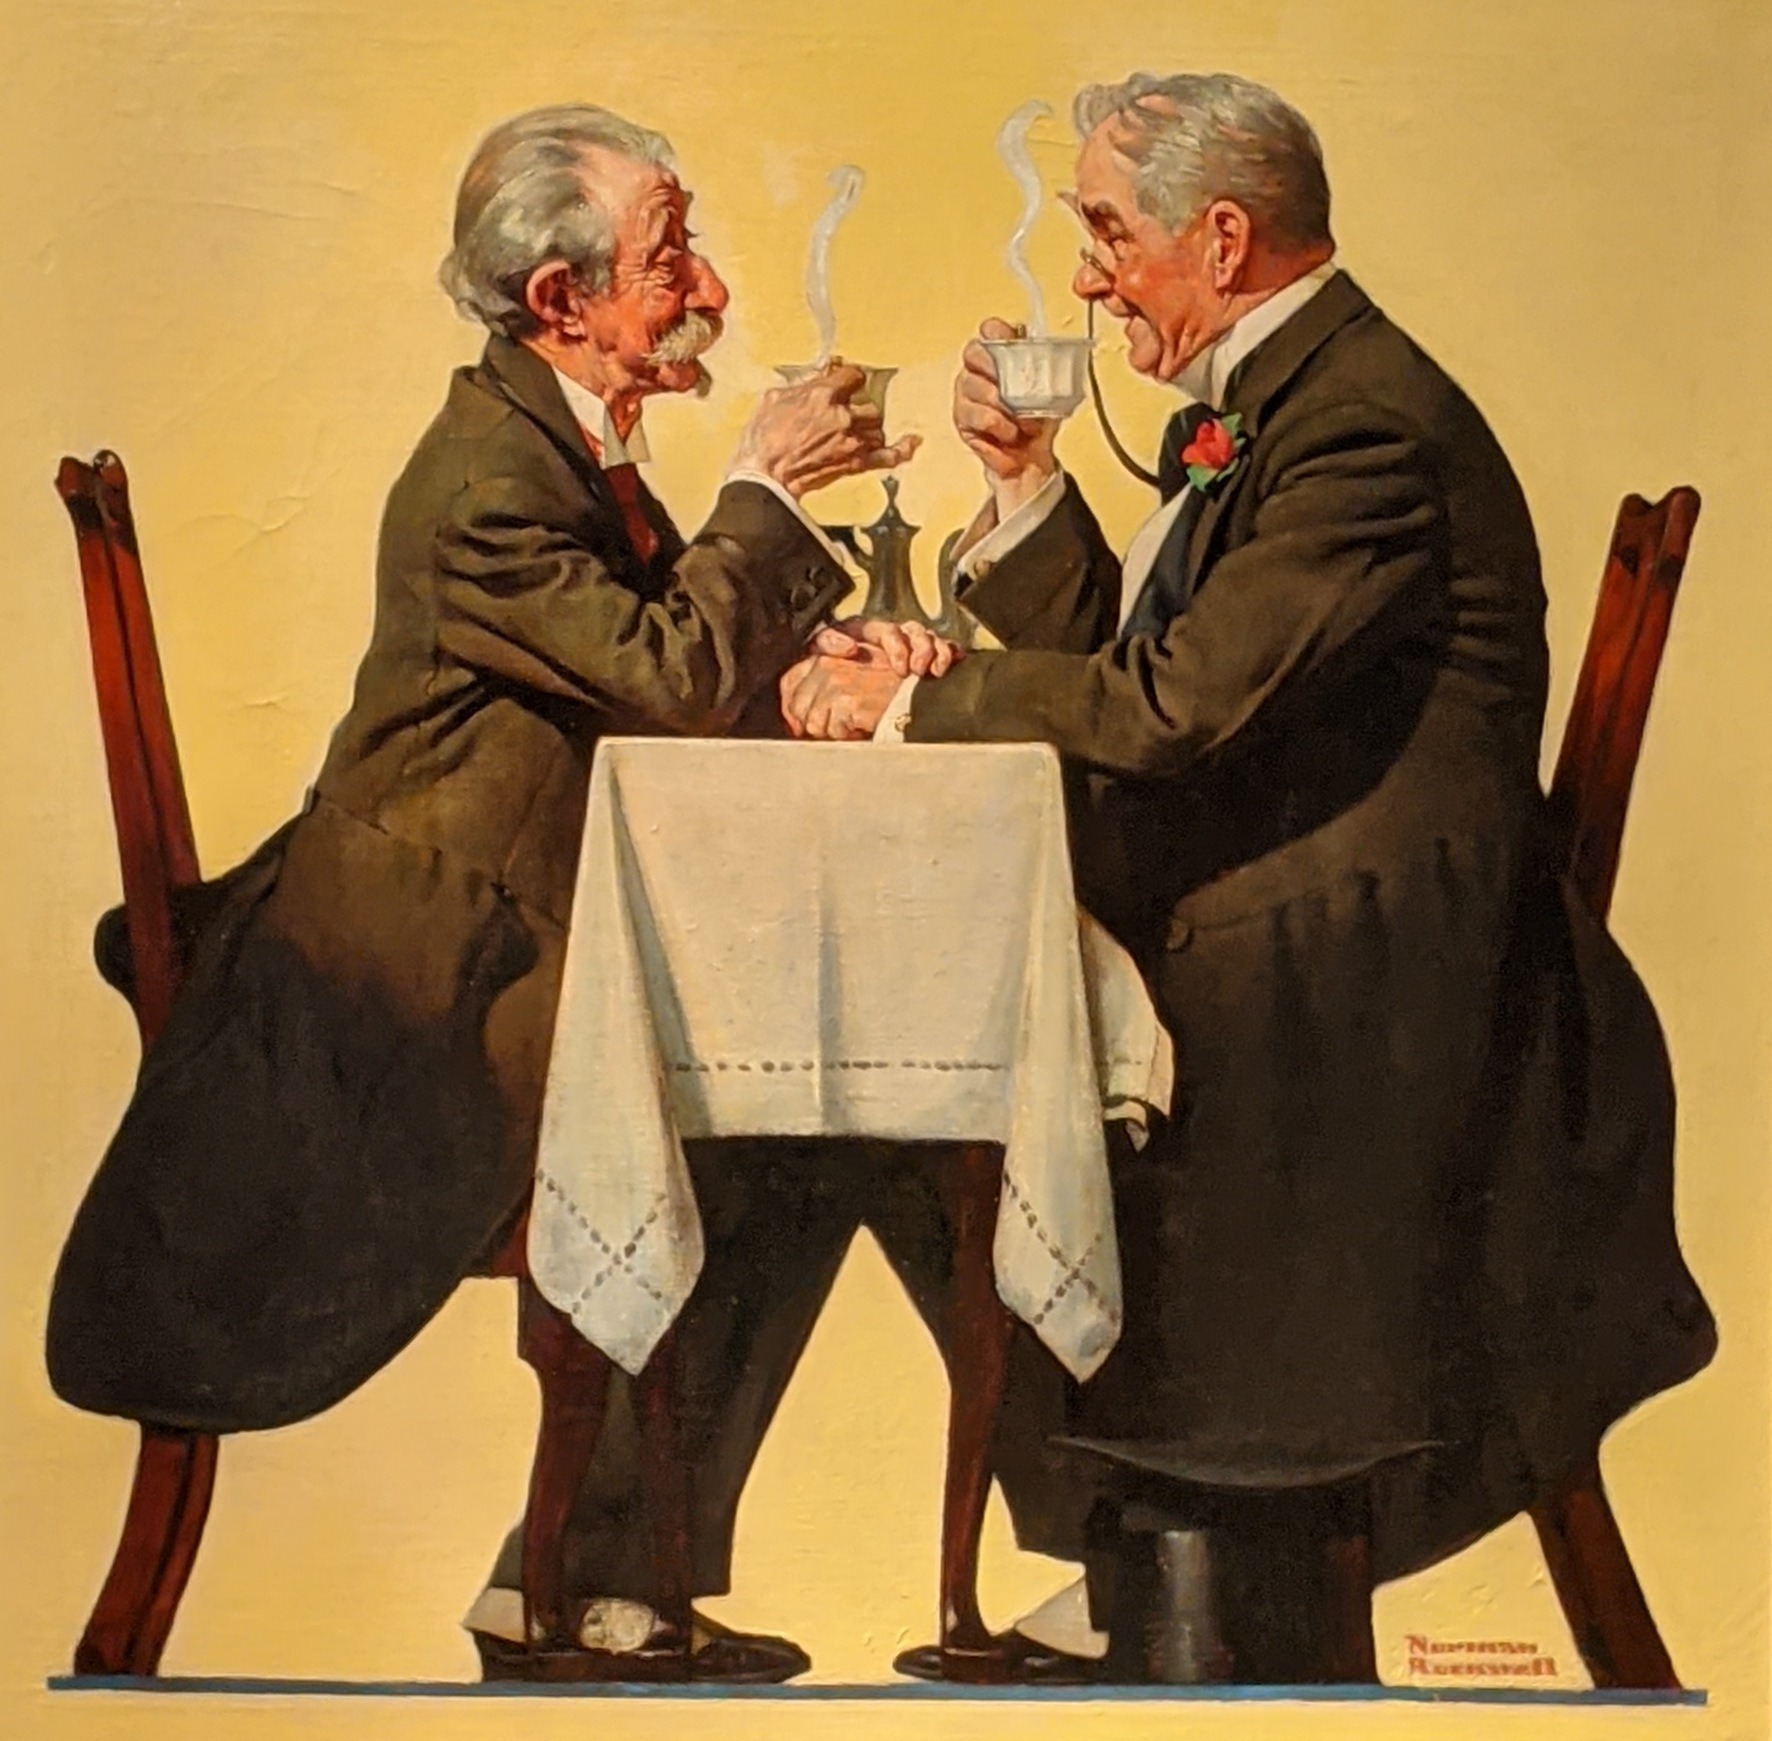 test-tube-super-baby:Norman RockwellUntitled (Two Gentleman Sharing A Pot Of Coffee) C. 1930